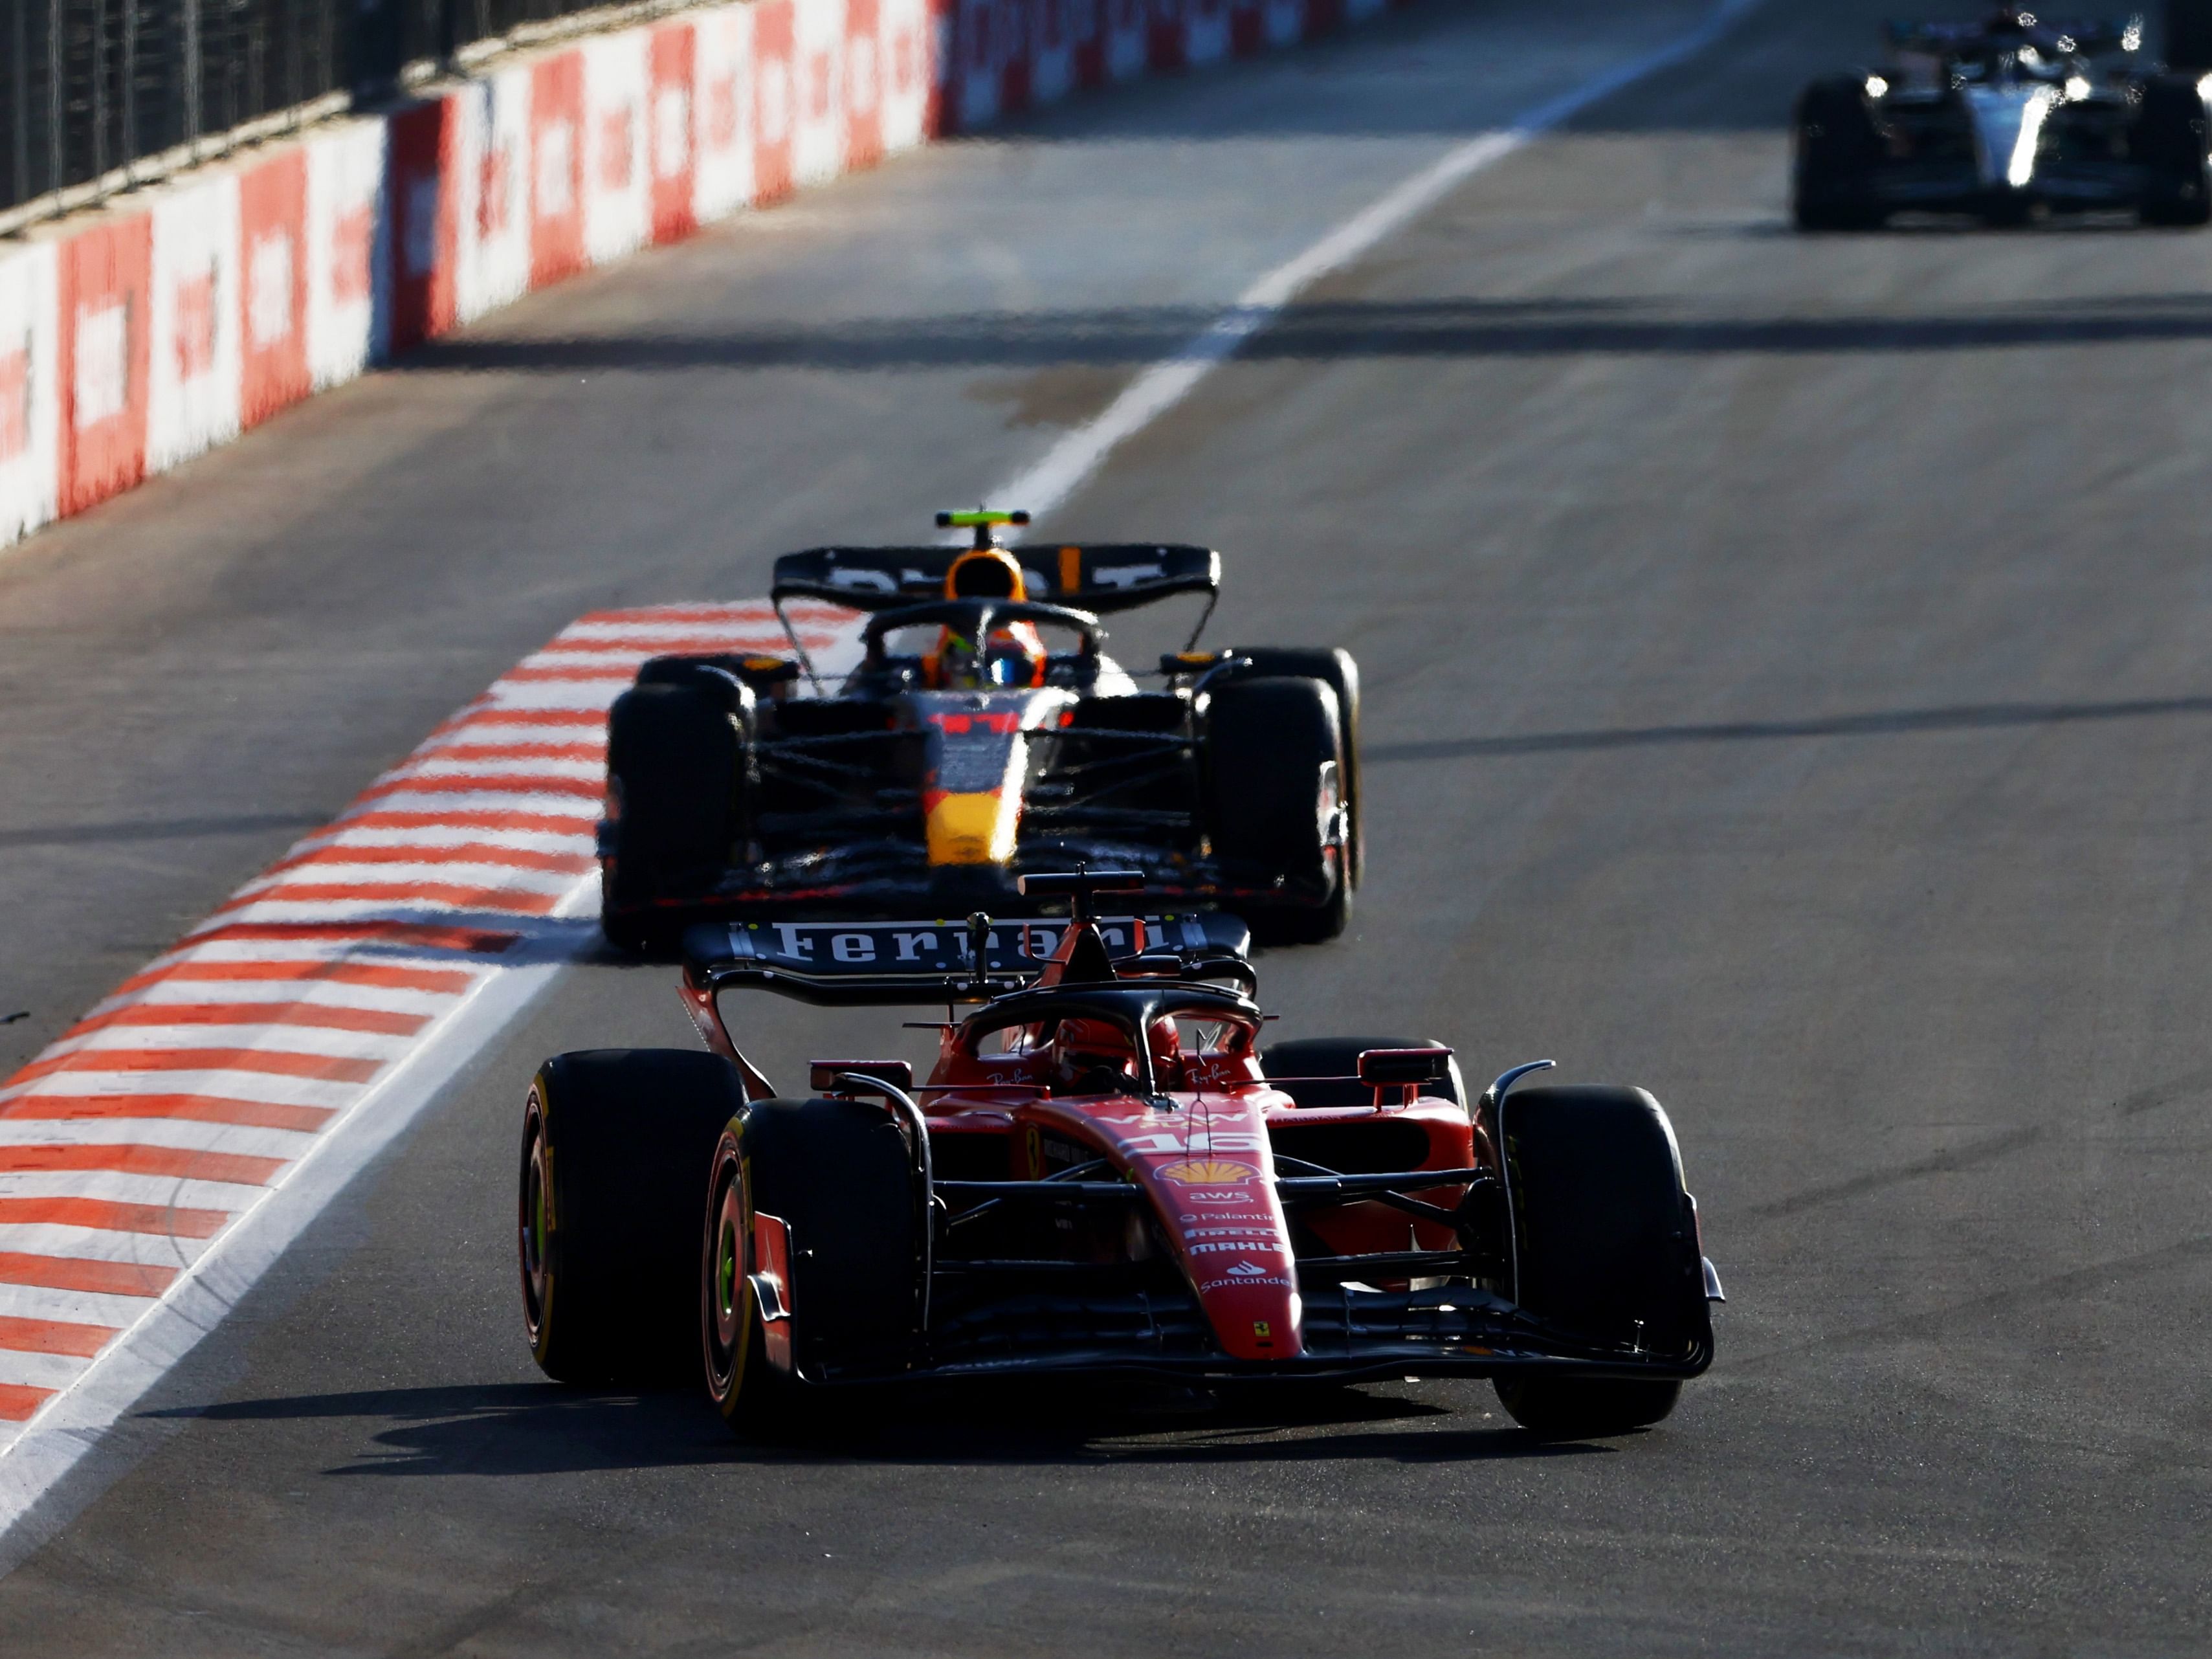 Charles Leclerc (16) leads Sergio Perez (11) during the Sprint ahead of the 2023 F1 Azerbaijan Grand Prix. (Photo by Mark Thompson/Getty Images)